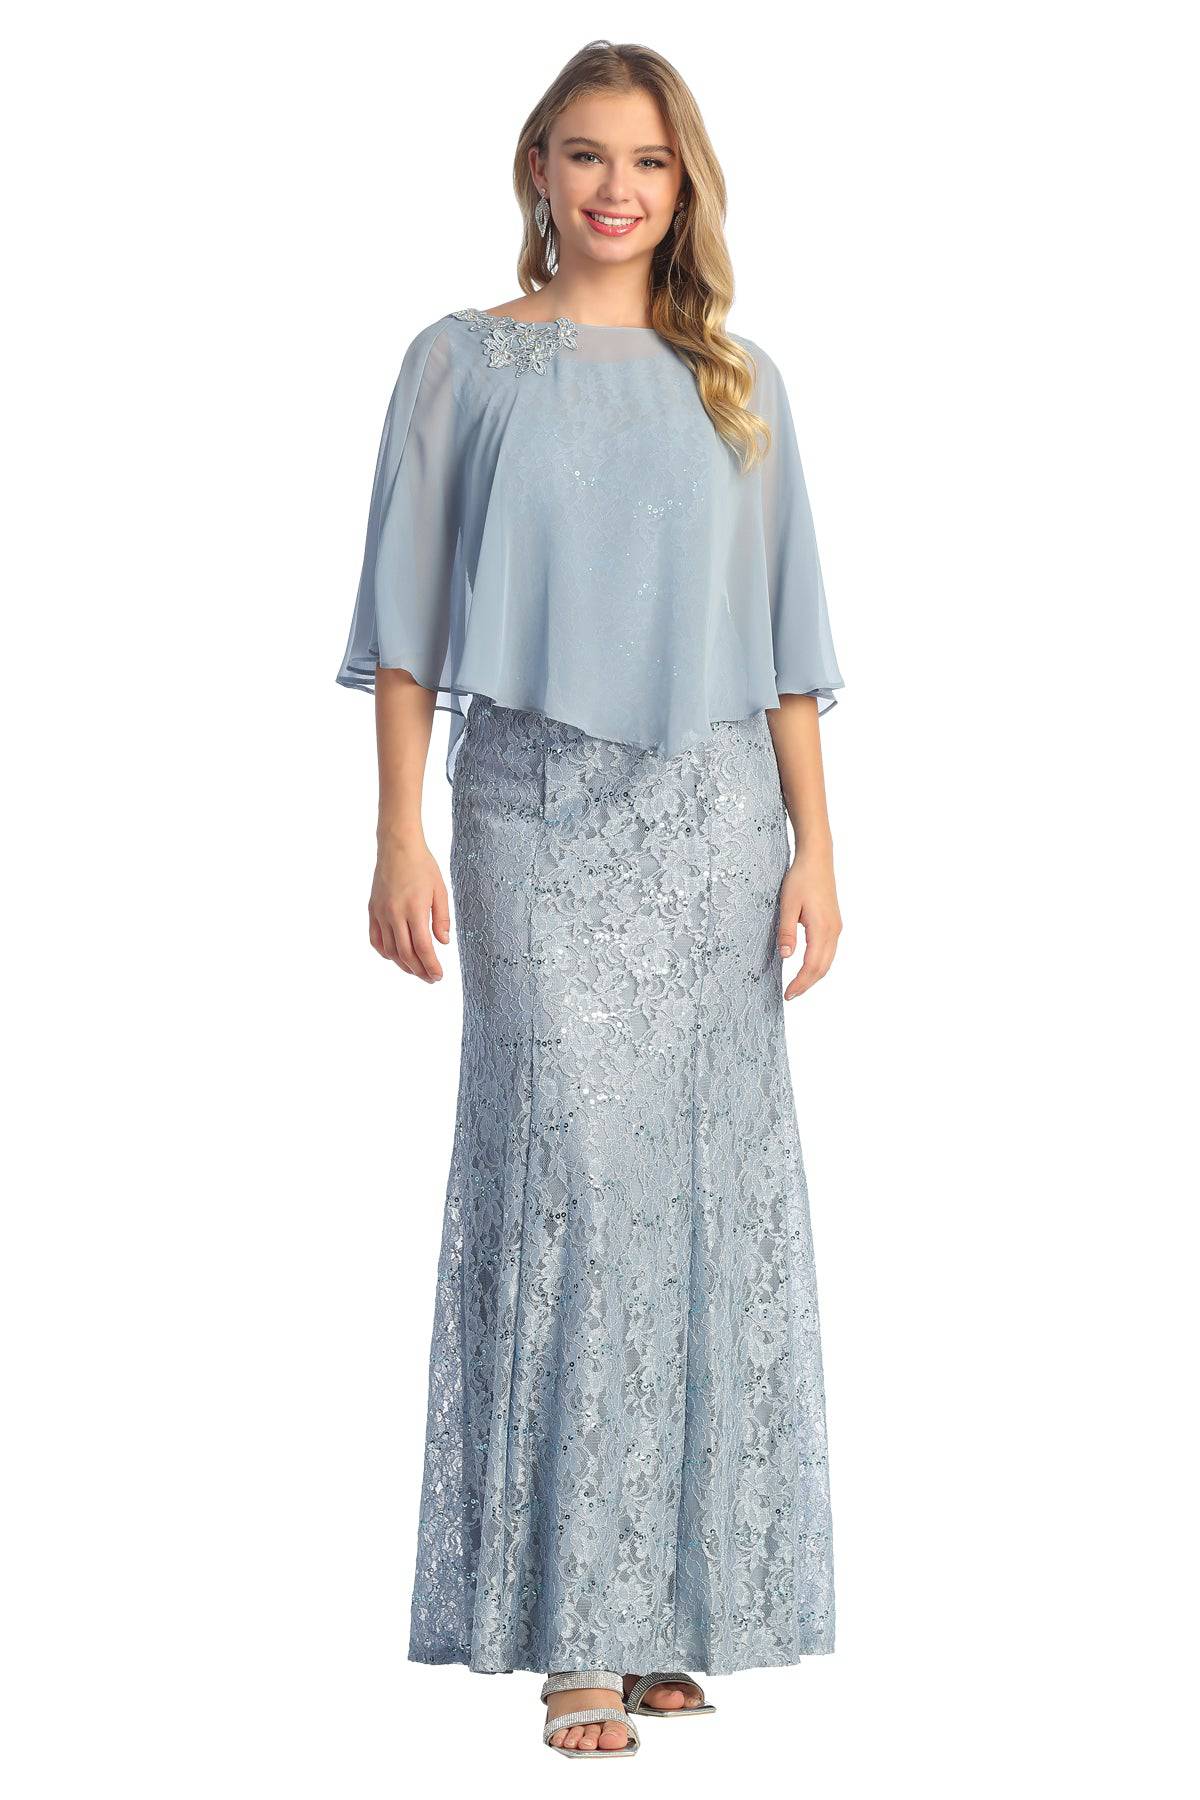 Cindy Collection 1732 Mother of the Groom Lace Dress - NORMA REED